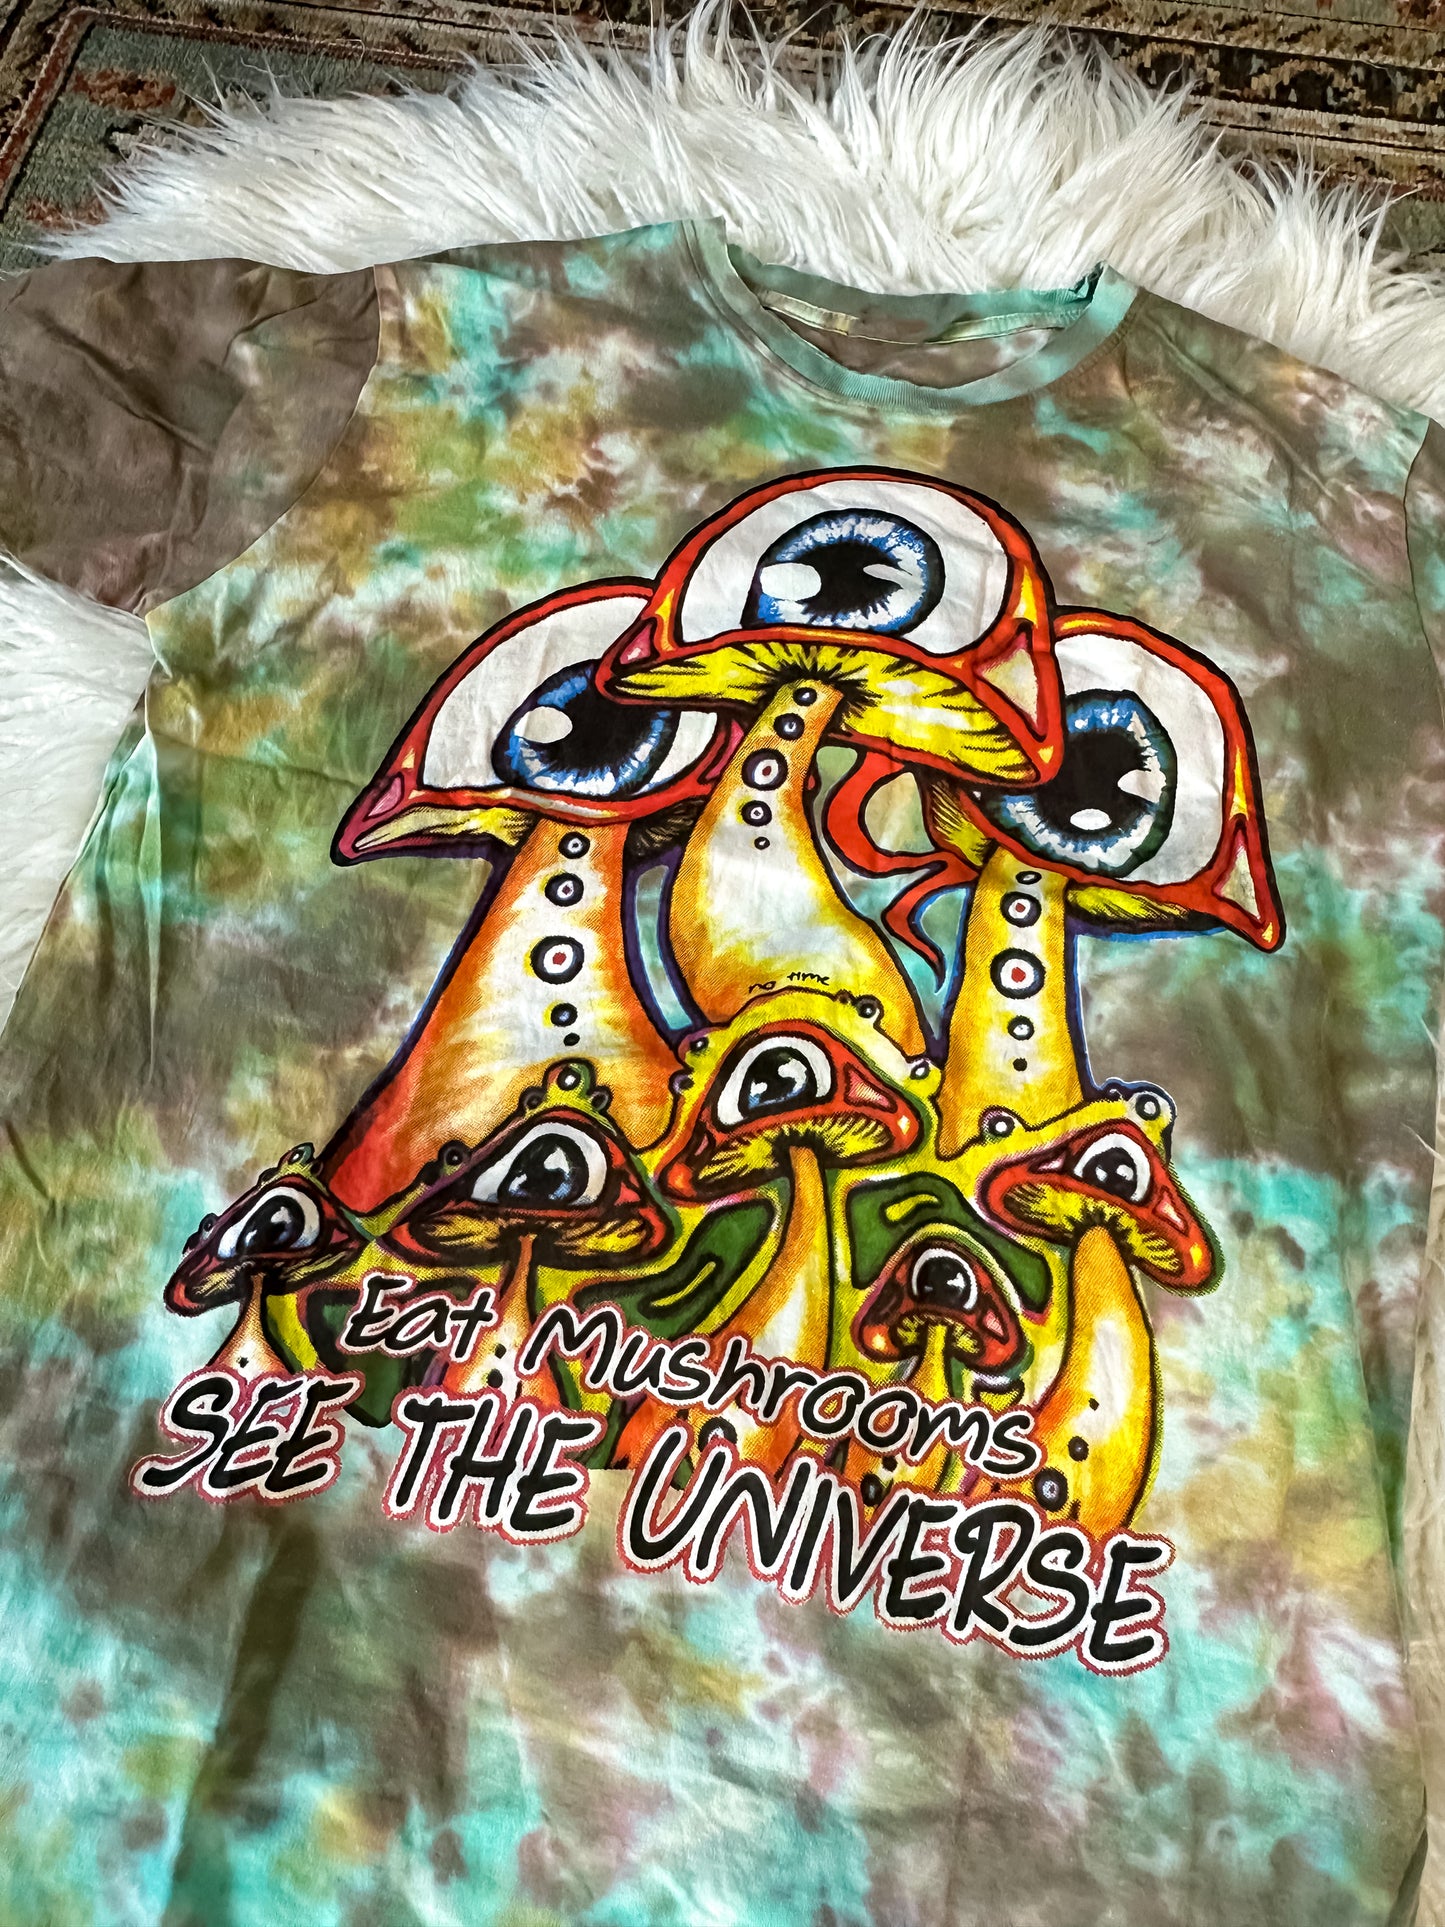 SEE THE UNIVERSE T-SHIRT